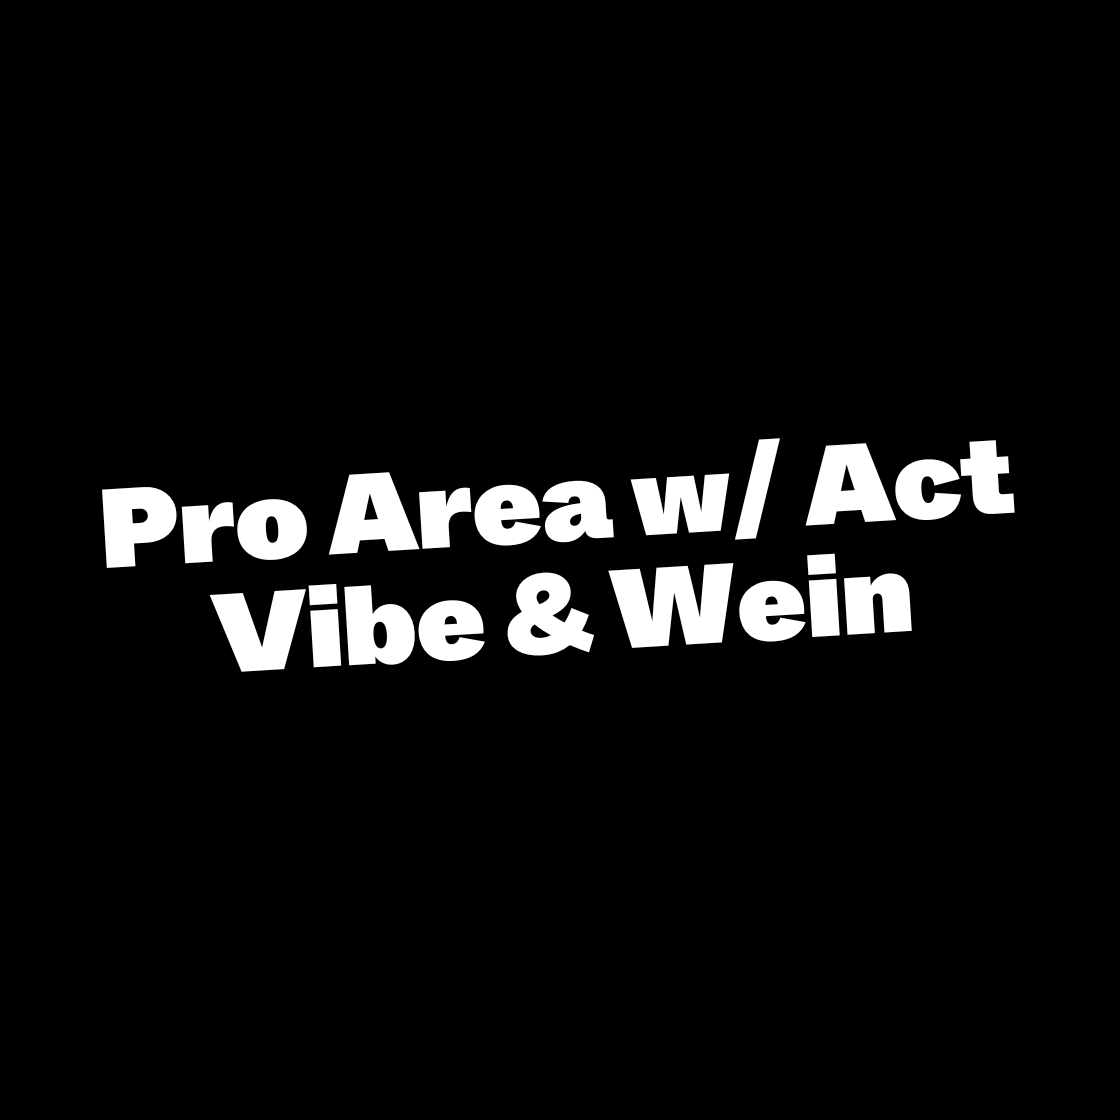 Pro Area w/ Act Vibe & Wein